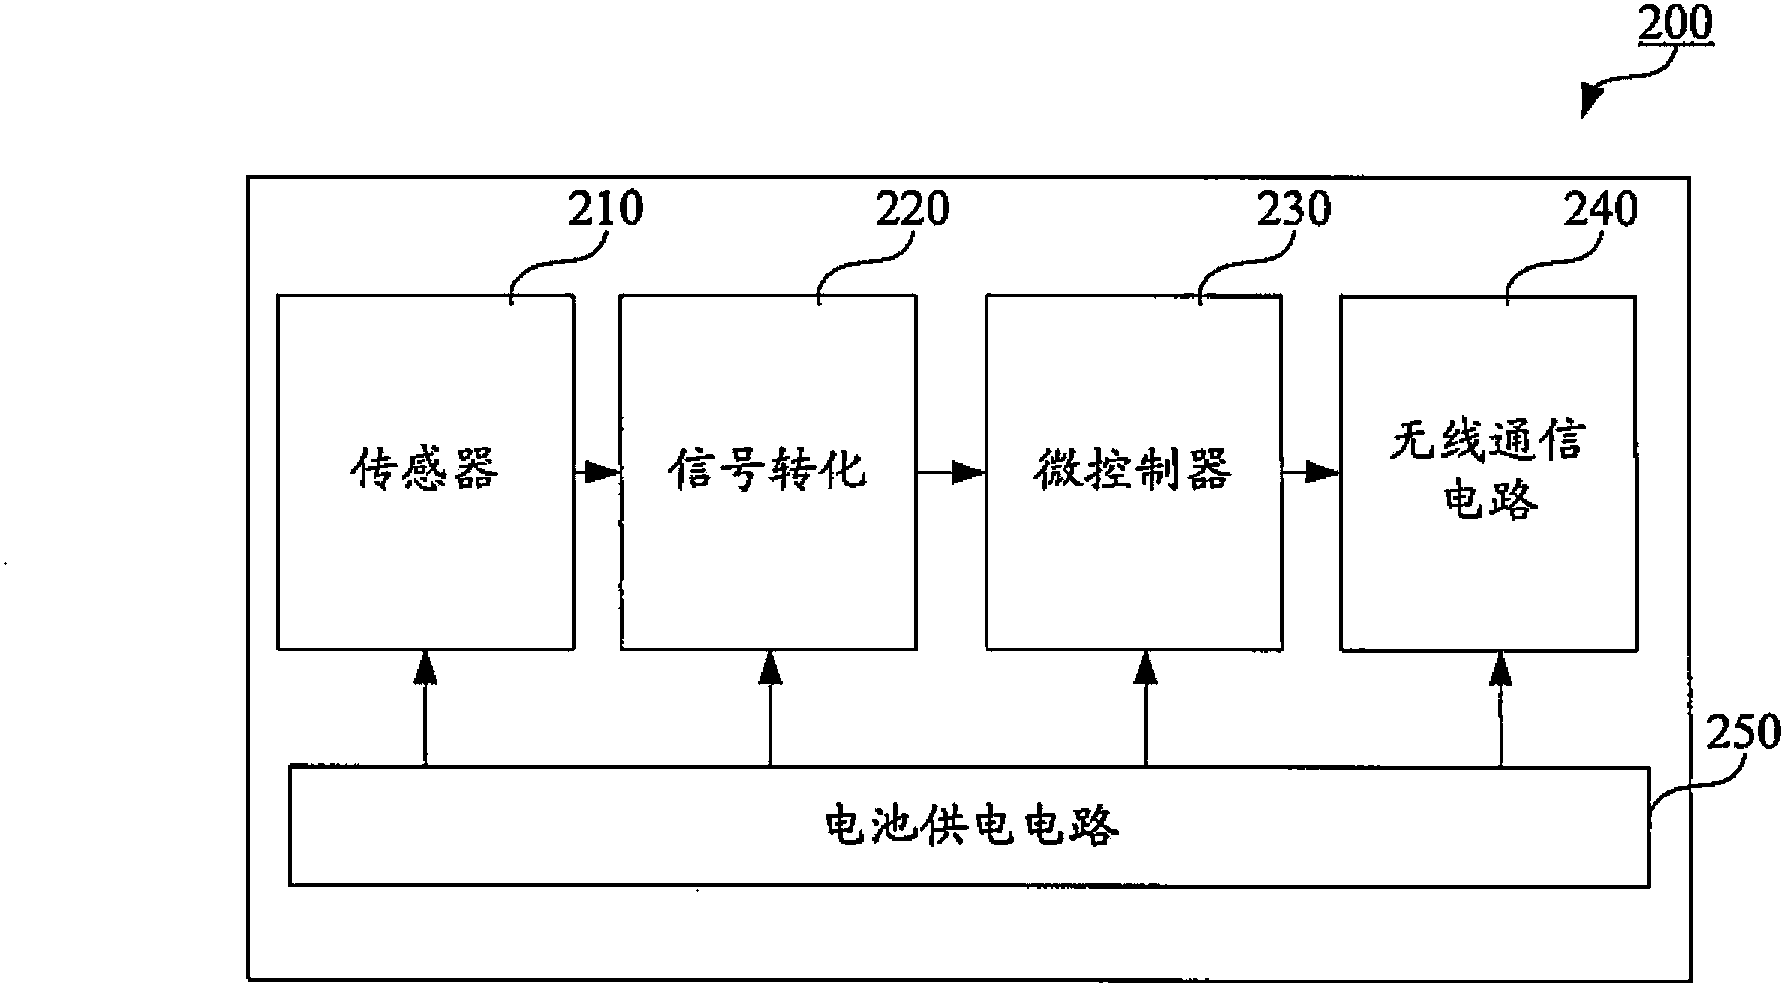 Semiconductor measuring device